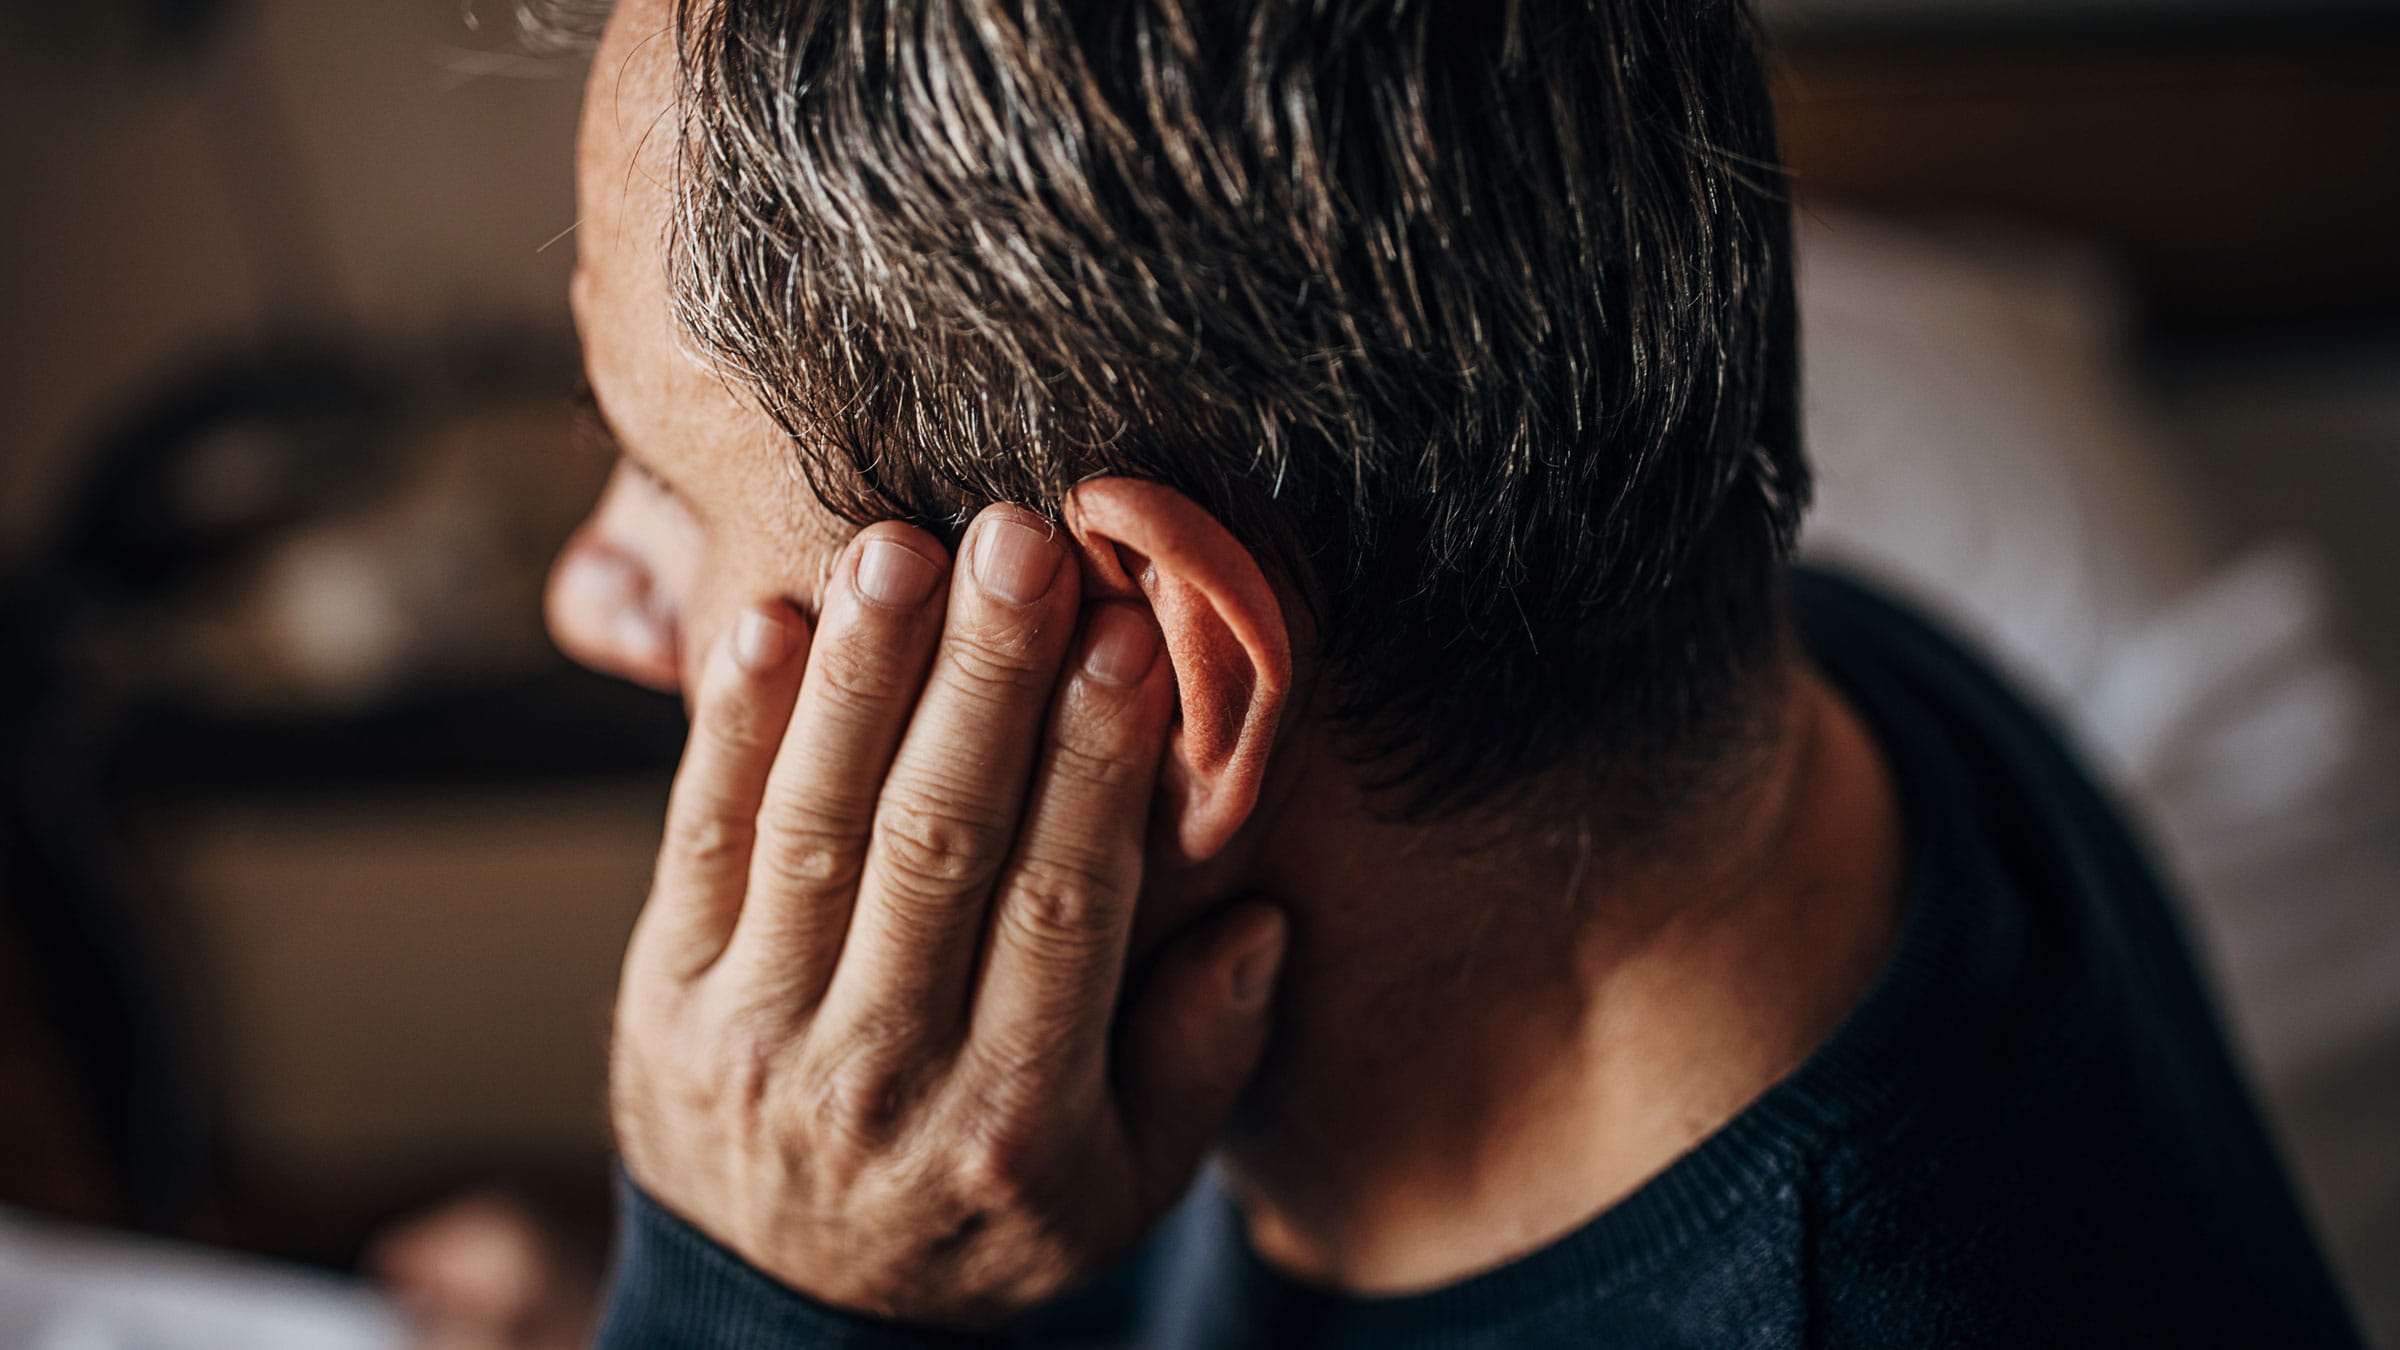 Ringing In The Ears, Tinnitus – Anxiety Symptoms - AnxietyCentre.com